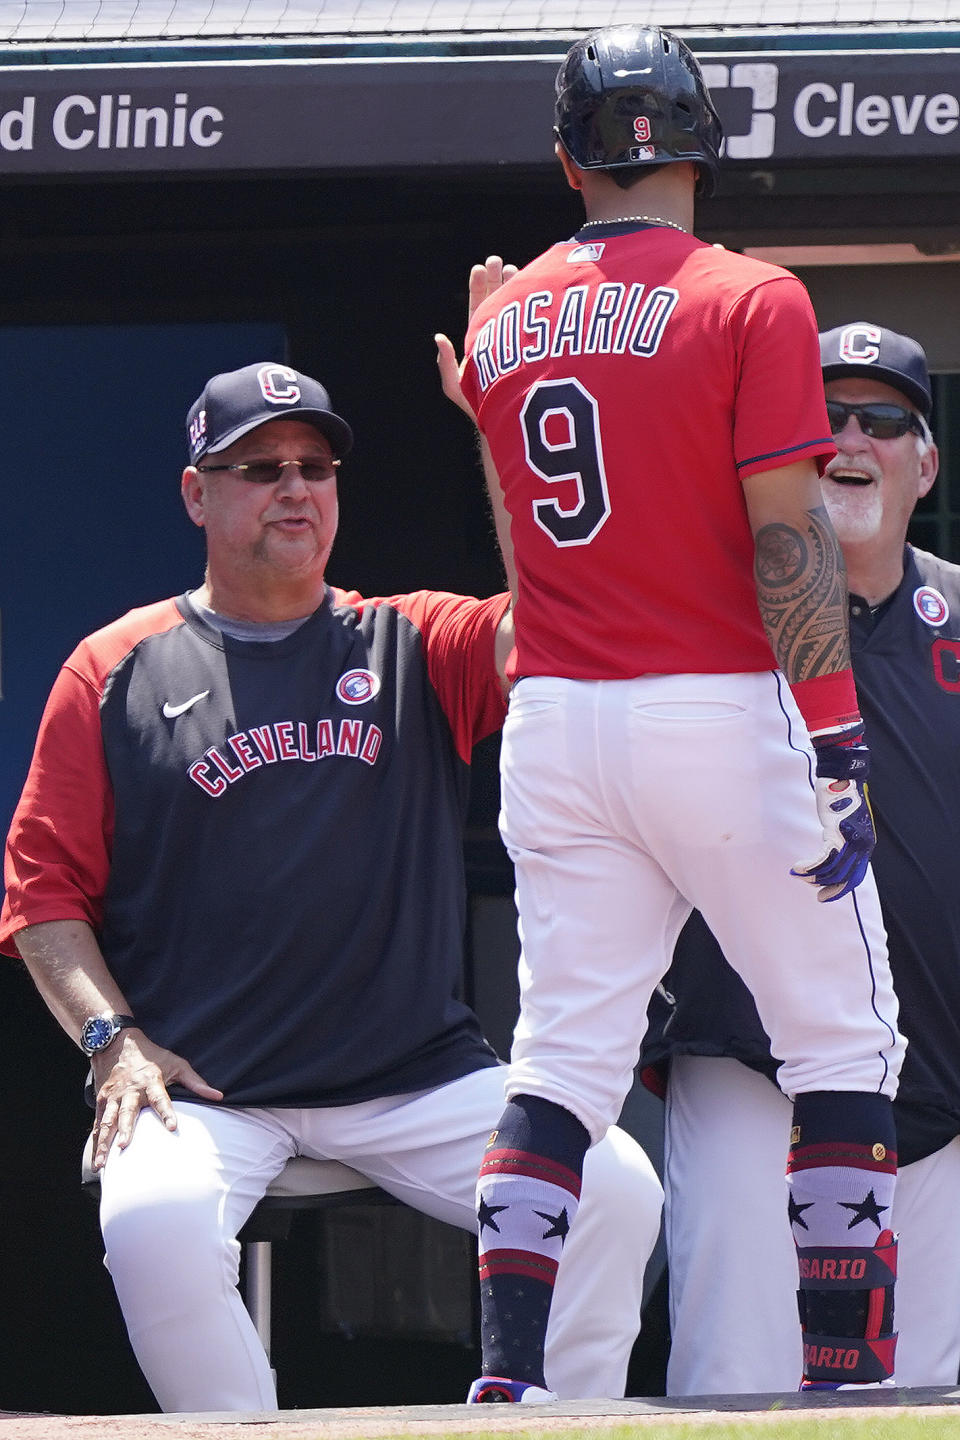 Cleveland Indians' Eddie Rosario, right, is congratulated by manager Terry Francona, left, after hitting a solo home run in the sixth inning of a baseball game against the Houston Astros, Sunday, July 4, 2021, in Cleveland. (AP Photo/Tony Dejak)